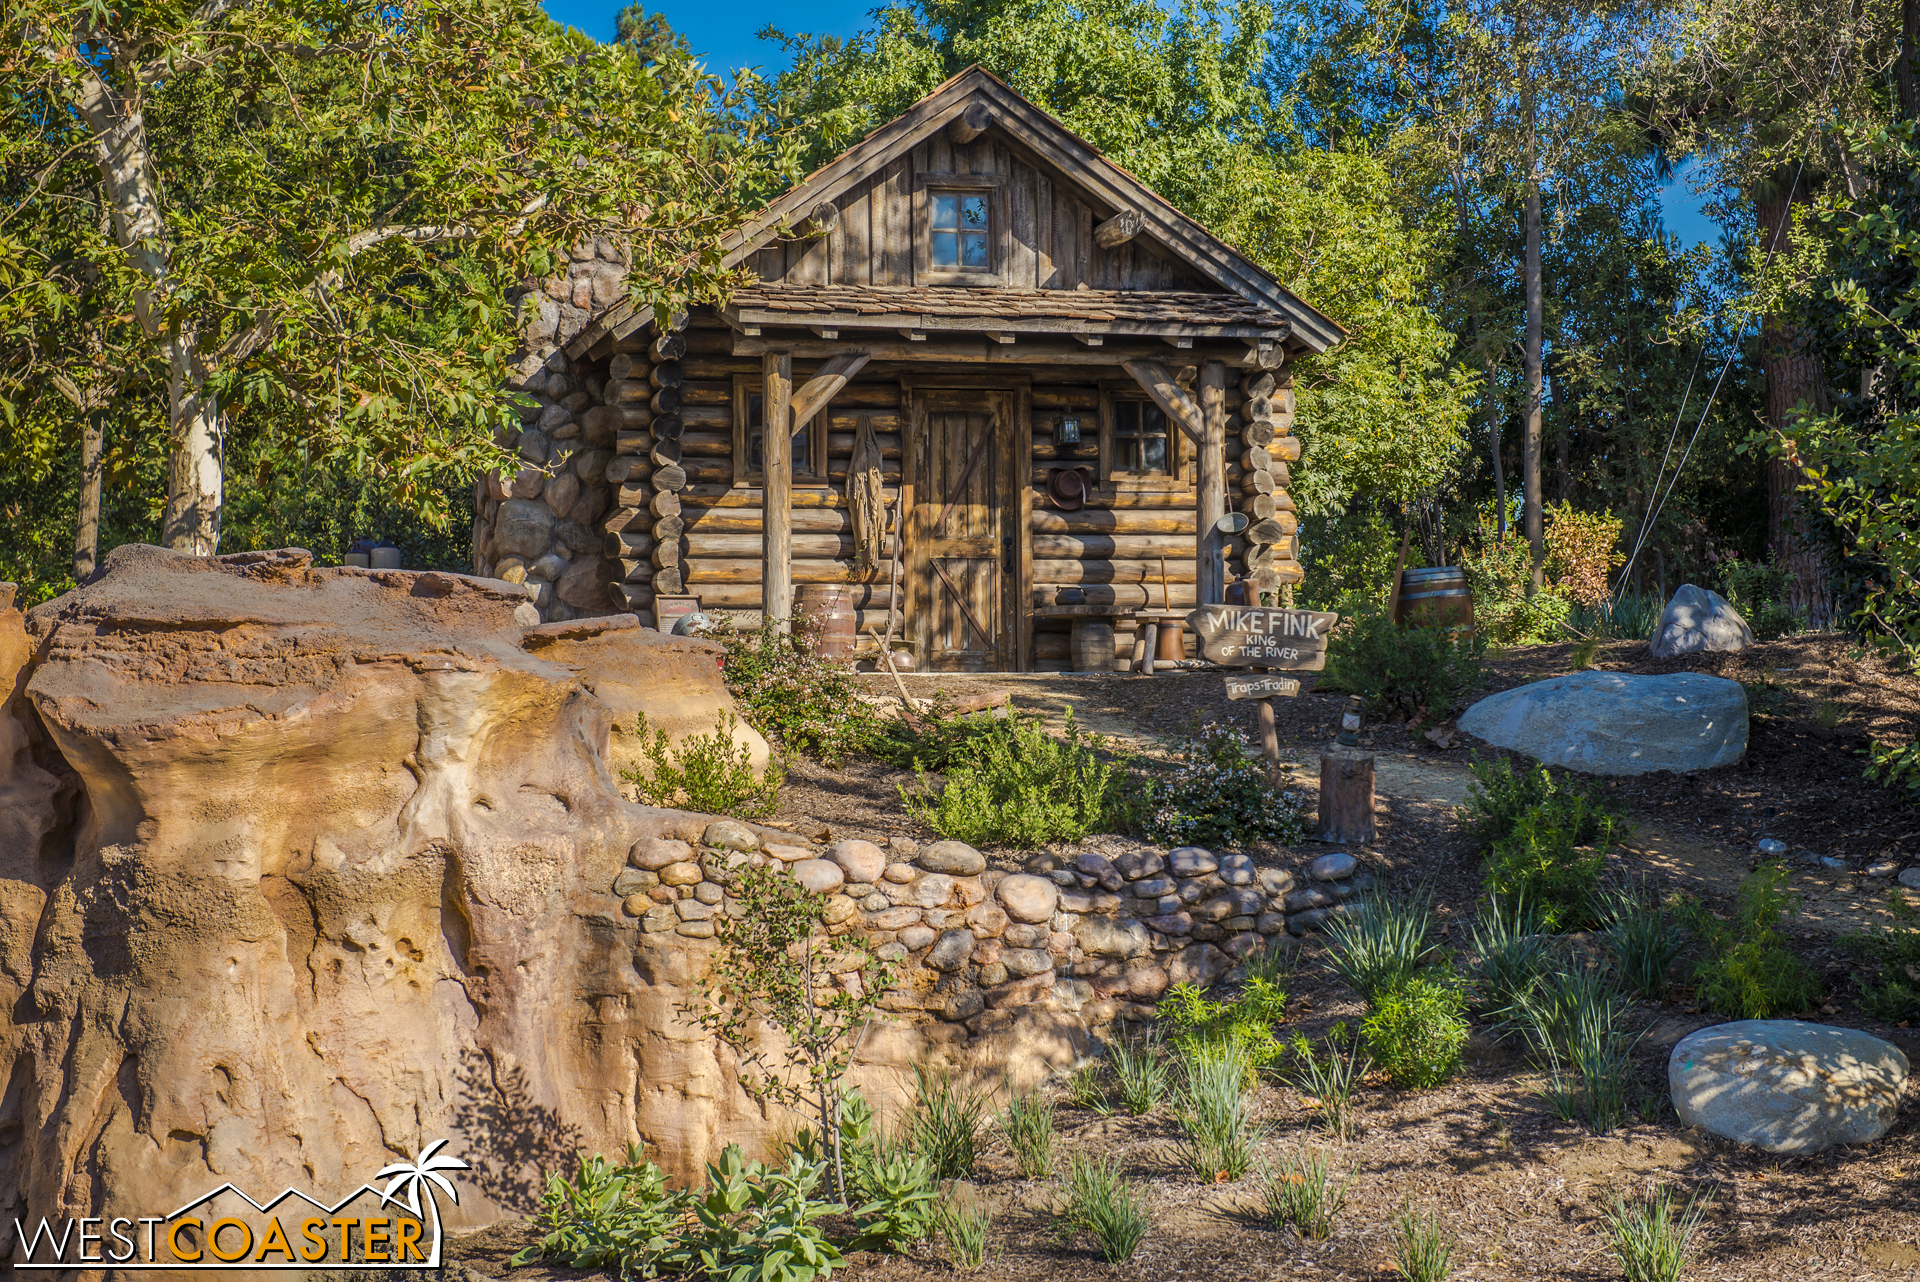  On the Tom Sawyer side of things, the old "burning cabin" is now Mike Fink's little retreat.&nbsp; A nice nod to the old keelboats that once sailed the Rivers of America. 